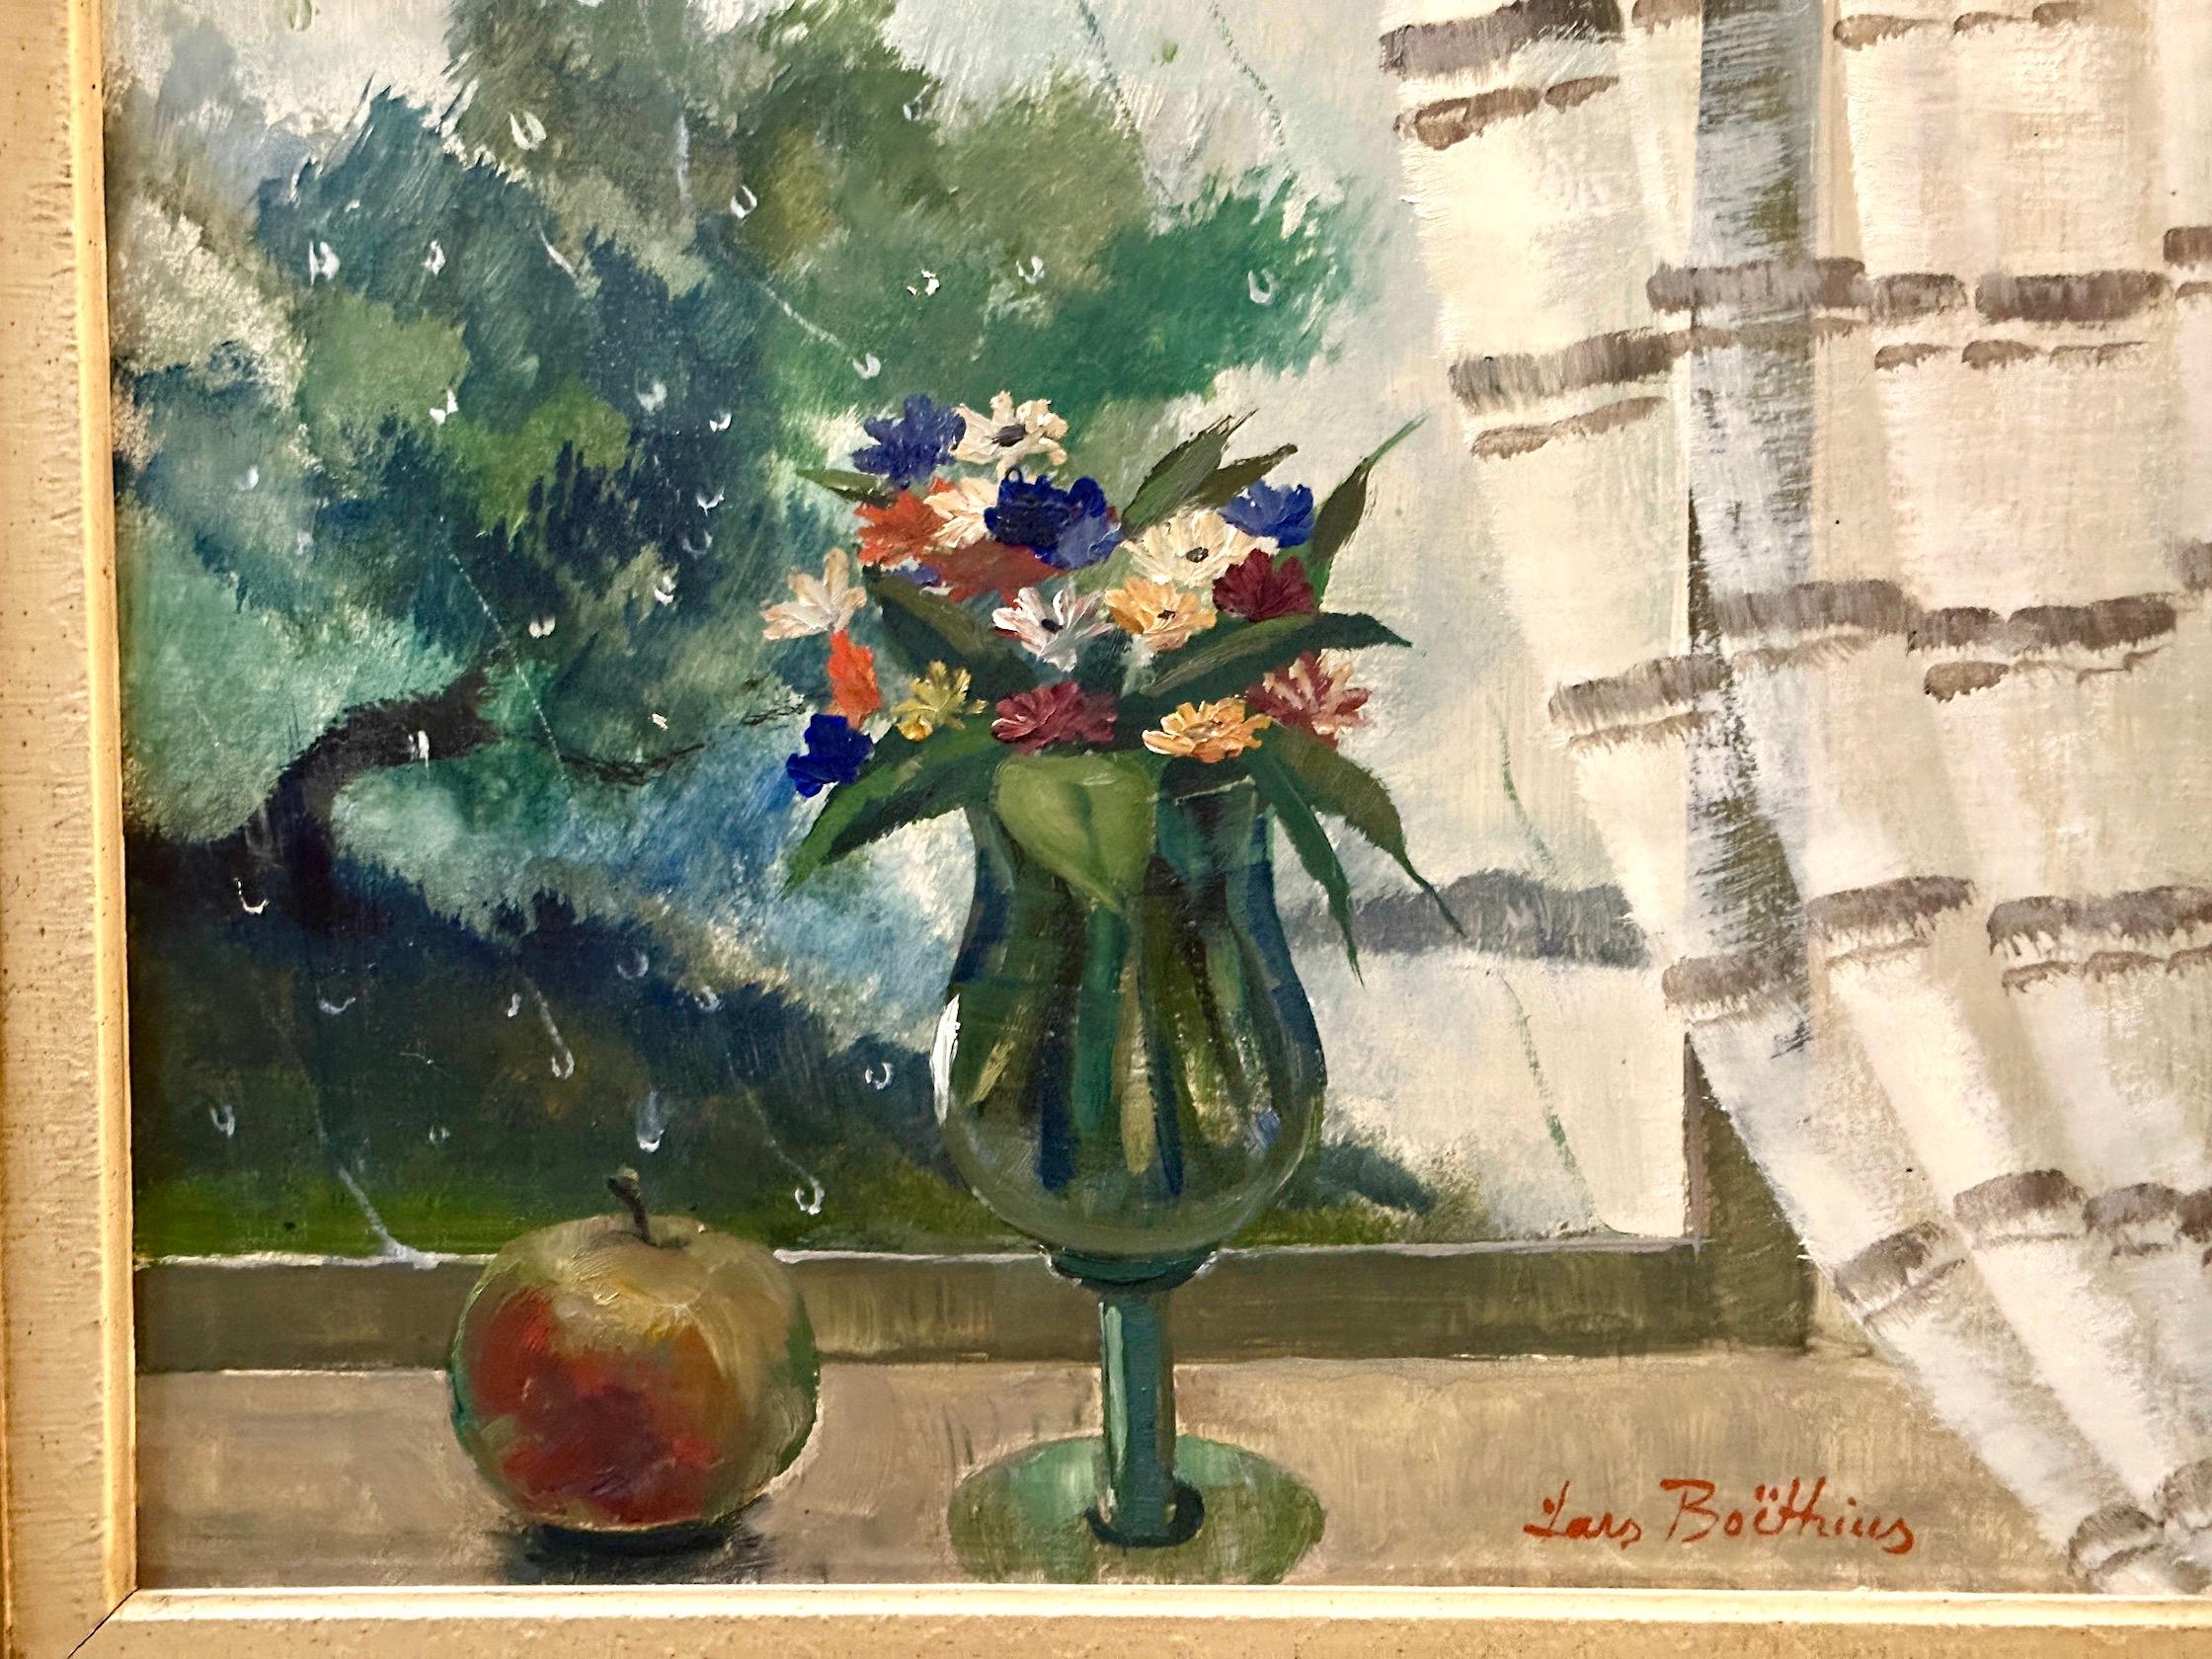 Mid century Swedish Impressionist still life of flowers in an interior - Painting by Lars Boëthius